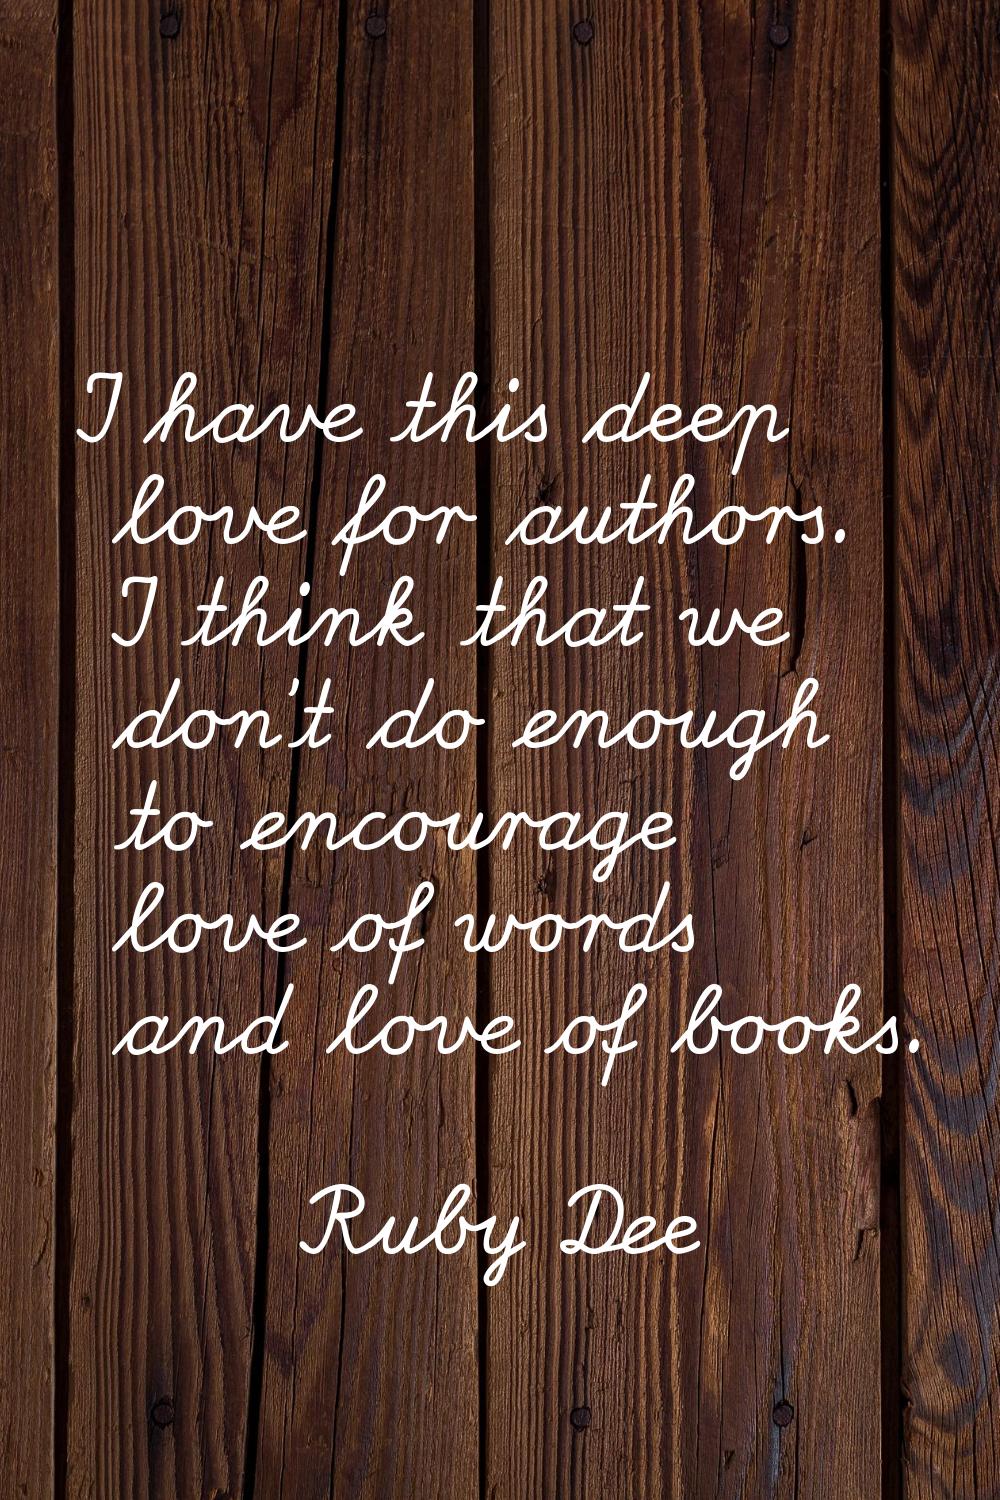 I have this deep love for authors. I think that we don't do enough to encourage love of words and l